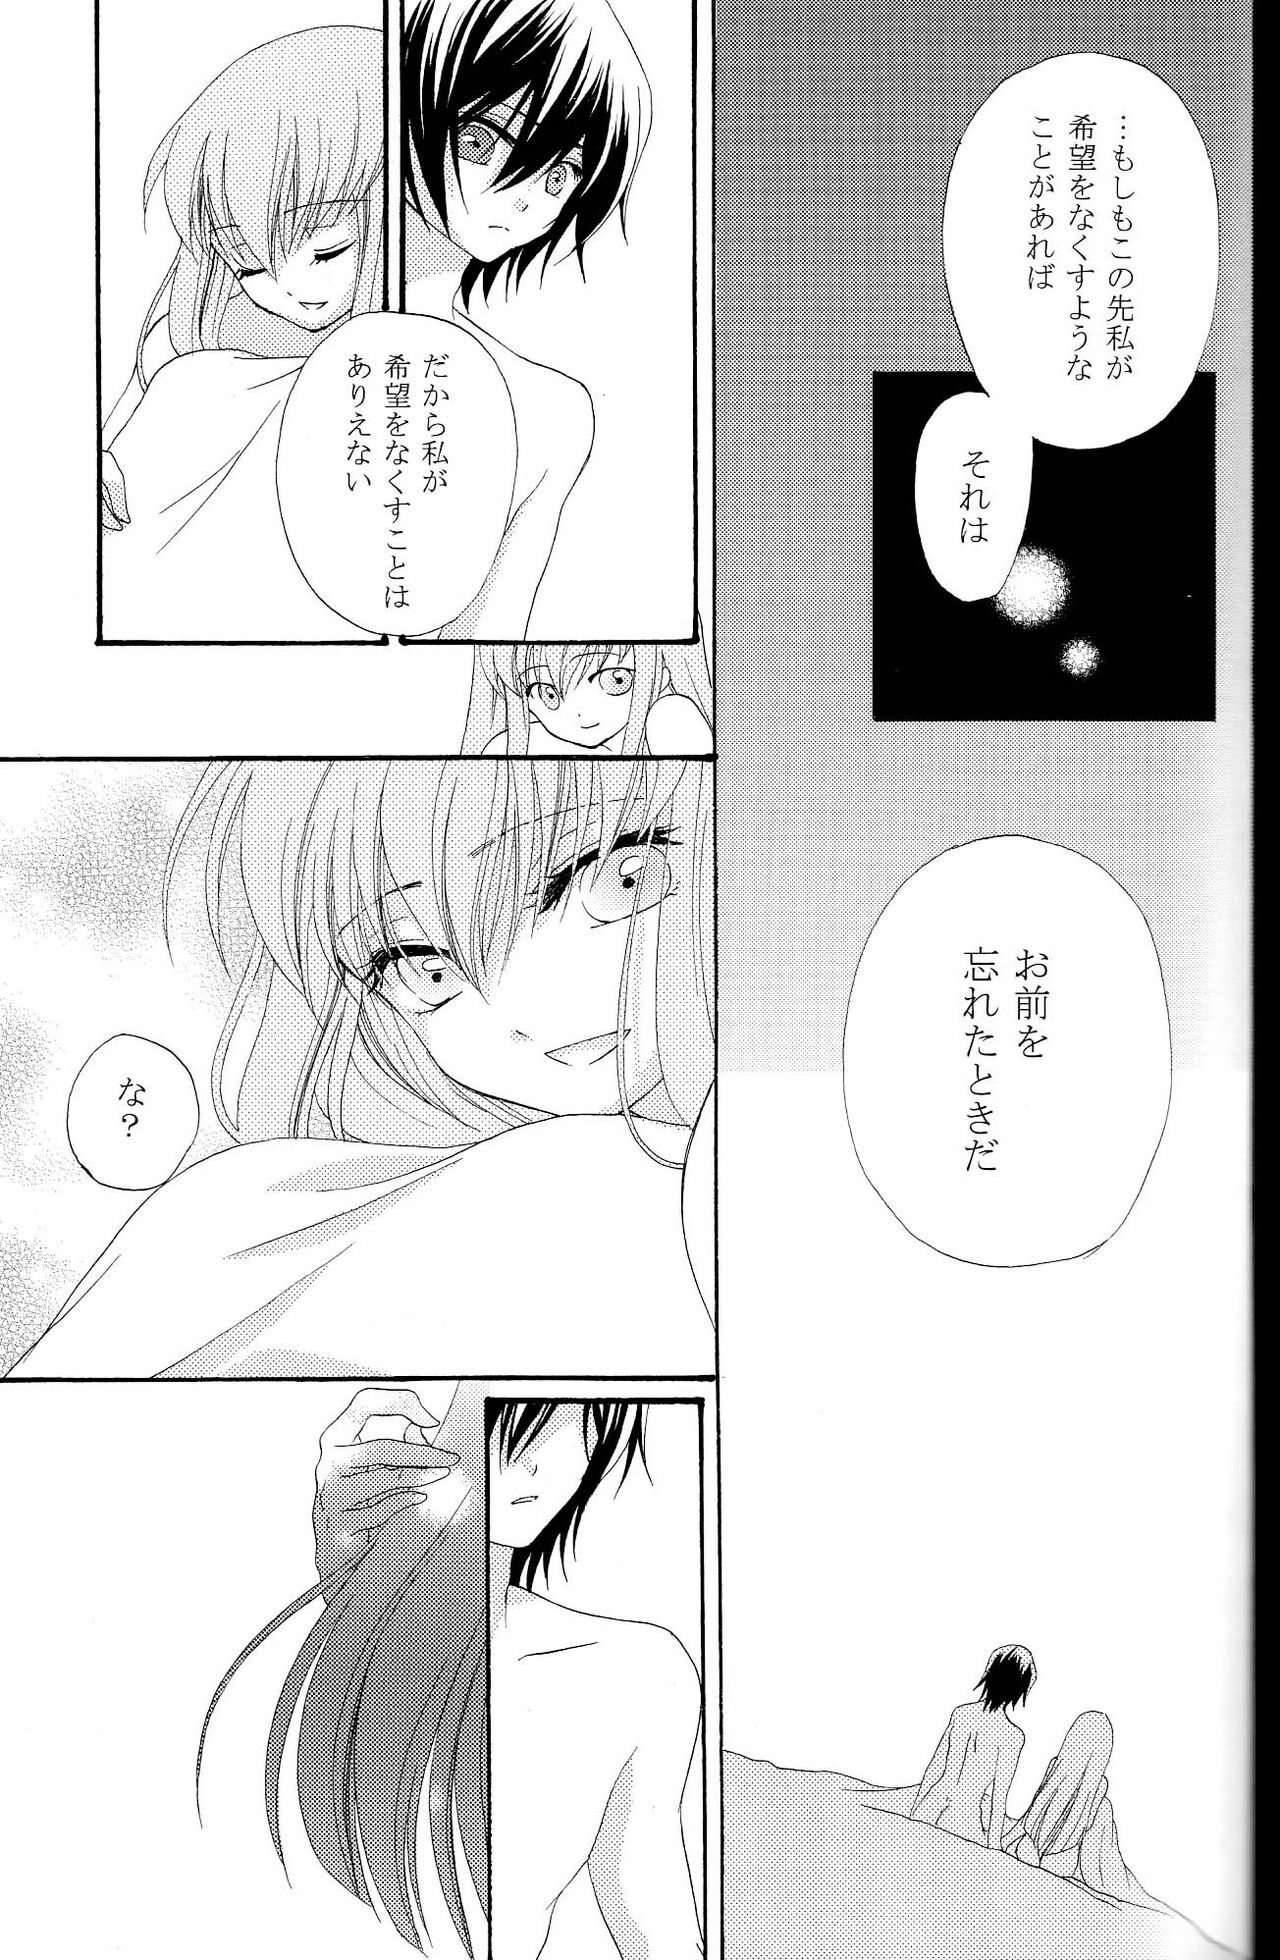 [APRICOT TEA] The last love letter presented to my dear only partner. (Code Geass) page 28 full